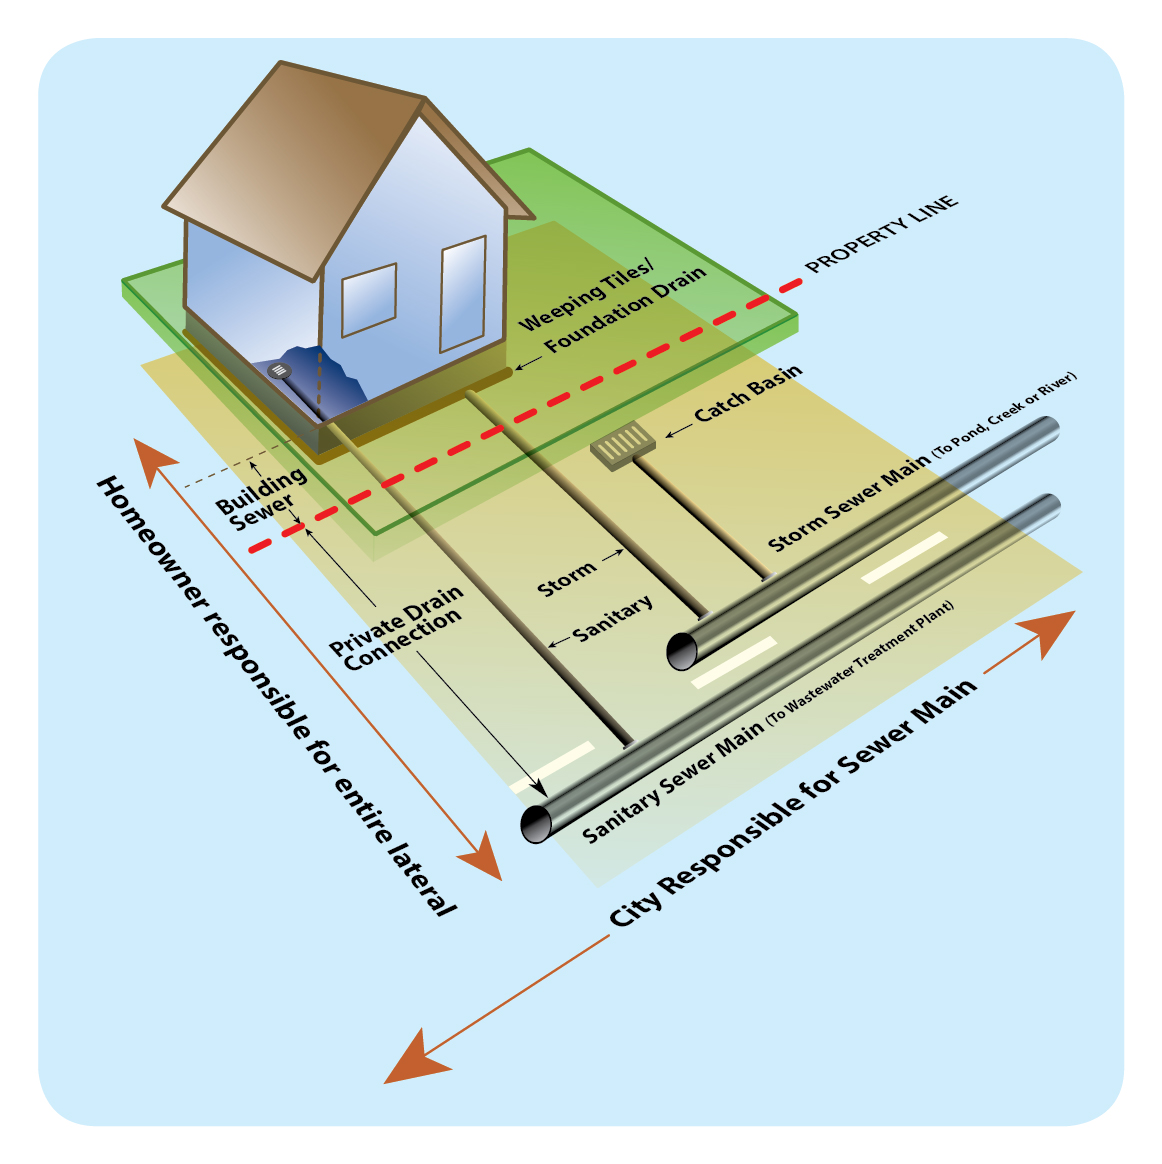 Diagram showing a homeowner's responsibility and the City's responsibility with respect to sanitary and storm conveyance systems. The homeowner is responsible for pipe connection between the house to the municipal sewer system. The City is only responsible for the main sewer pipe running along the road. 